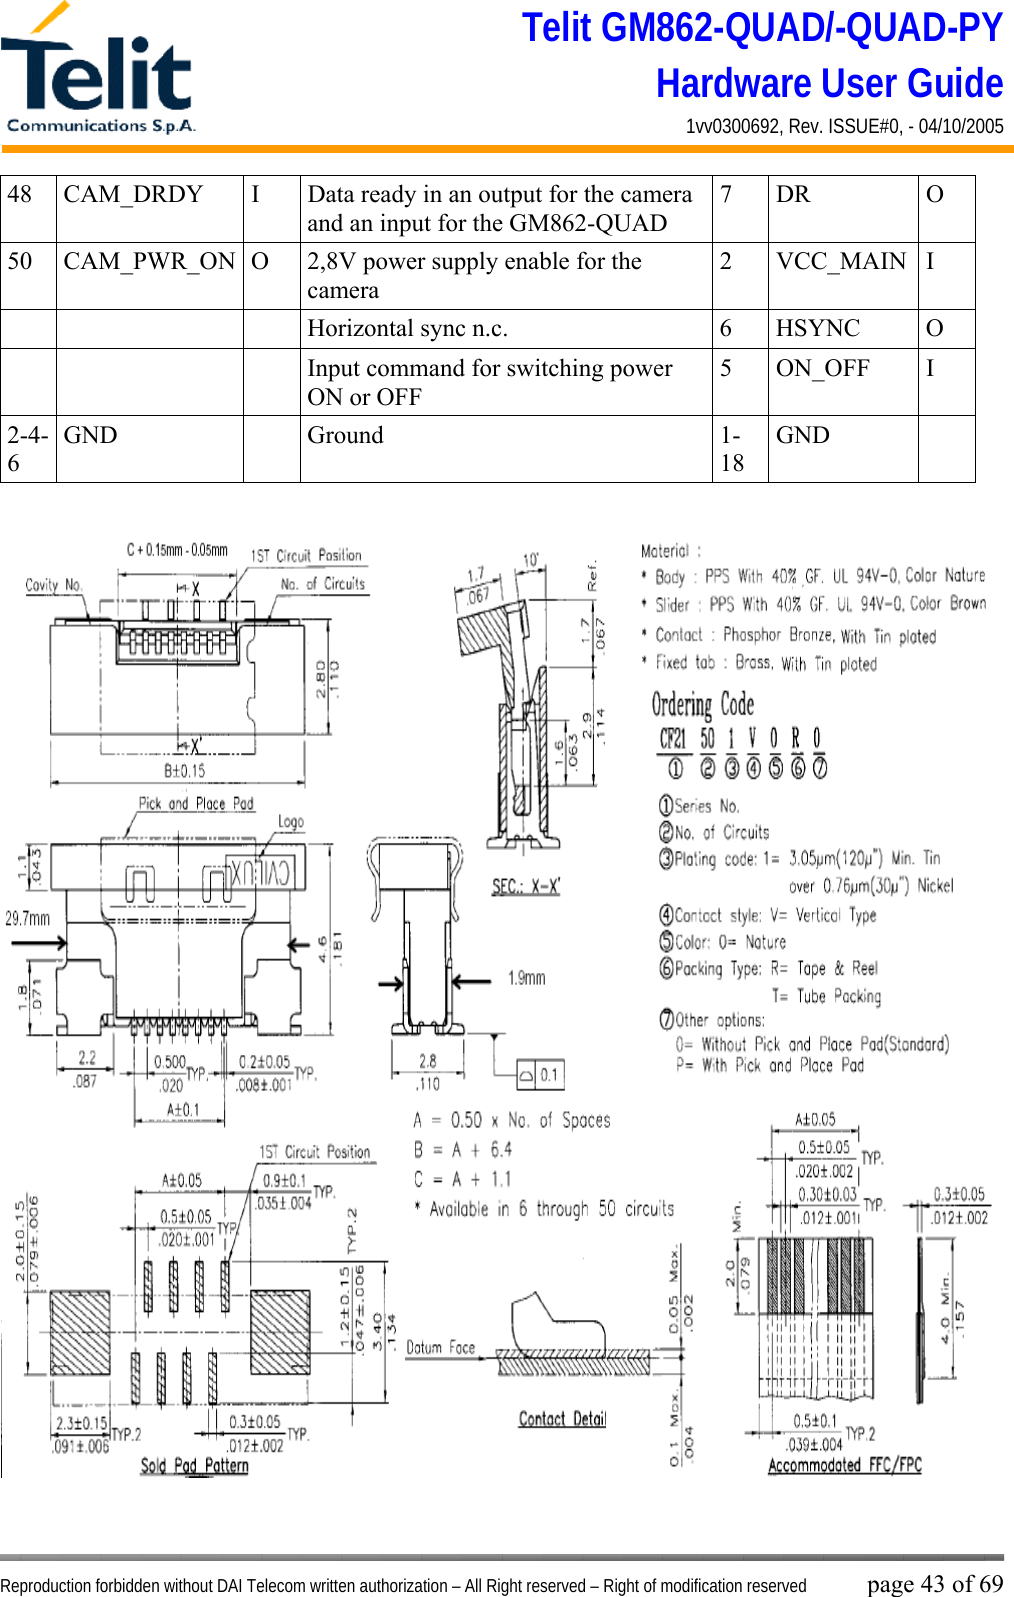 Telit GM862-QUAD/-QUAD-PY Hardware User Guide 1vv0300692, Rev. ISSUE#0, - 04/10/2005   Reproduction forbidden without DAI Telecom written authorization – All Right reserved – Right of modification reserved page 43 of 69 48  CAM_DRDY  I  Data ready in an output for the camera and an input for the GM862-QUAD  7 DR  O 50  CAM_PWR_ON  O  2,8V power supply enable for the camera  2 VCC_MAIN I       Horizontal sync n.c.  6  HSYNC  O       Input command for switching power ON or OFF 5 ON_OFF  I 2-4-6 GND  Ground  1-18 GND   